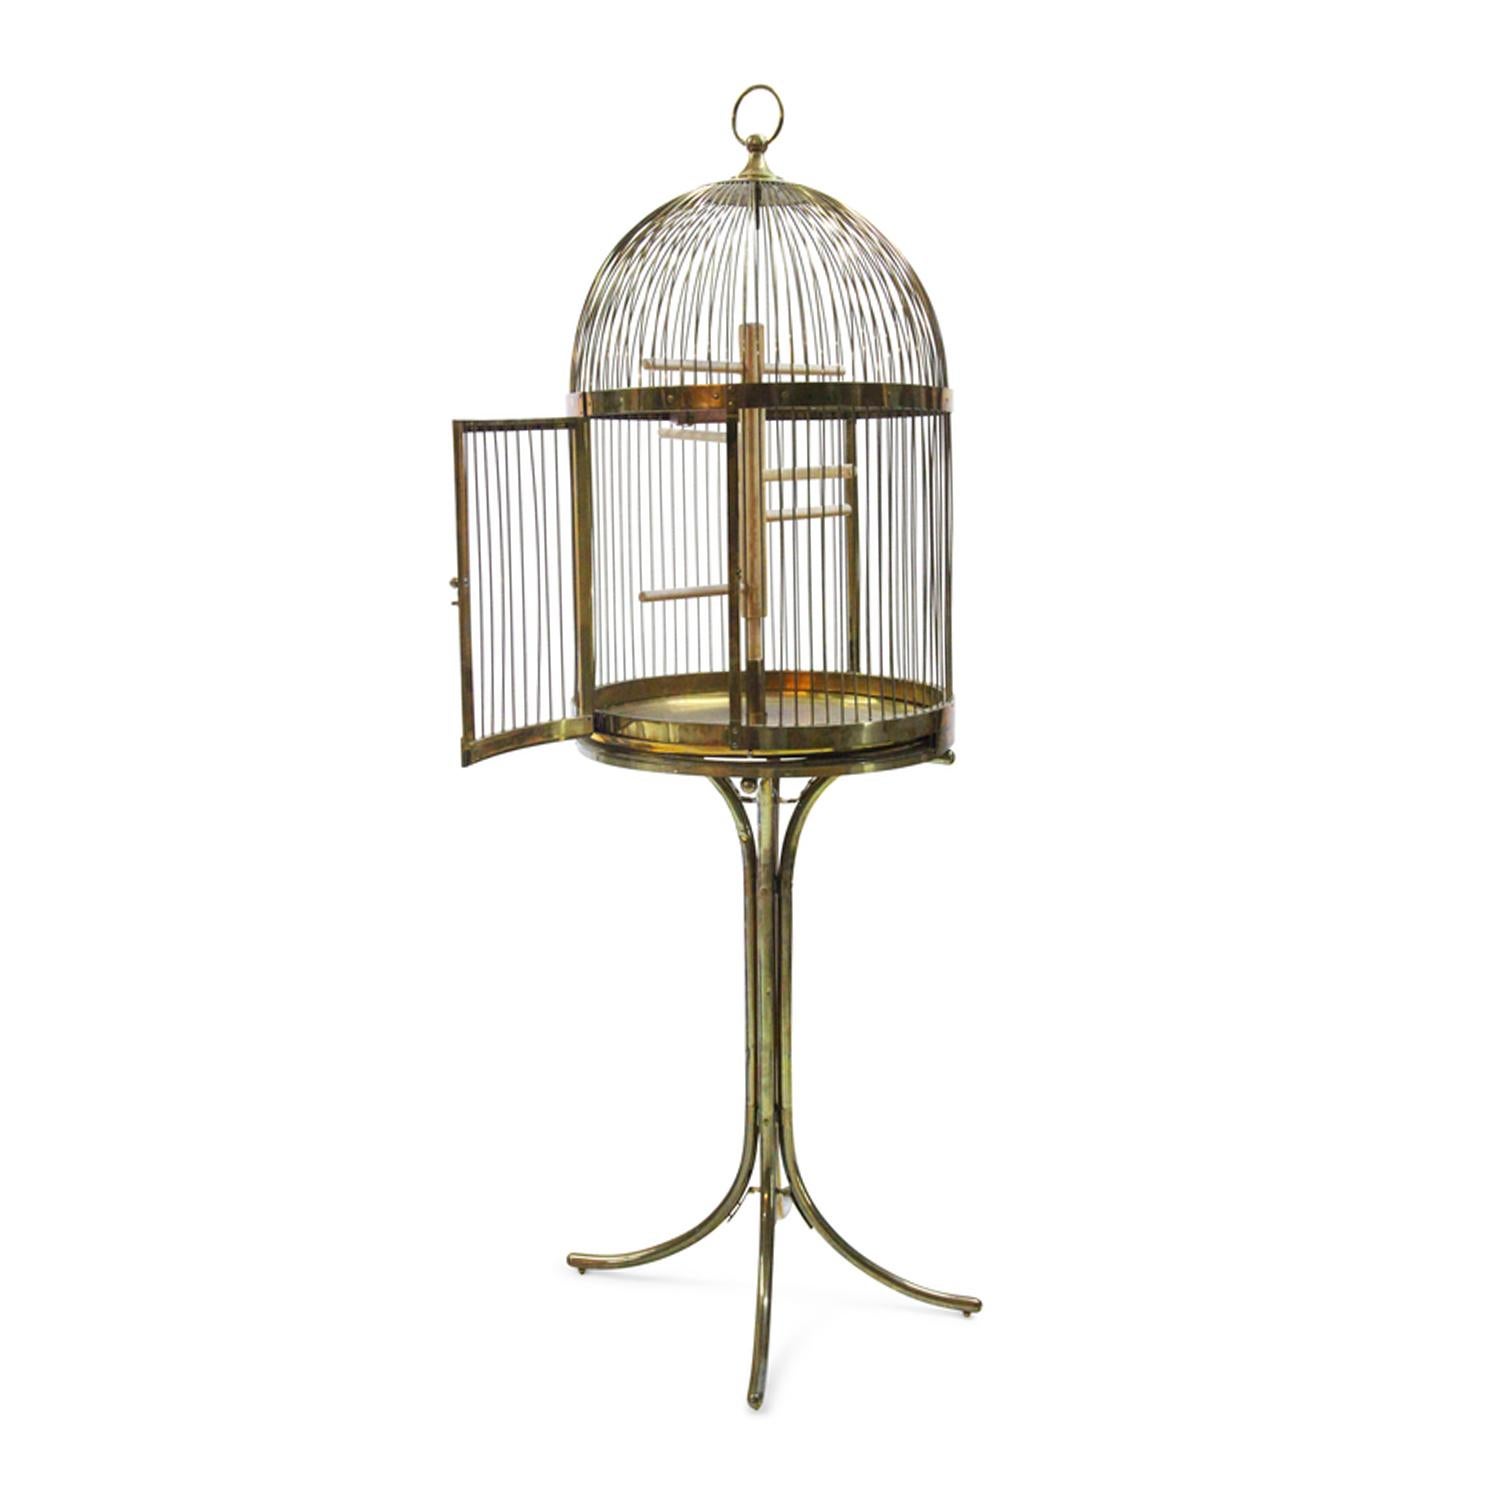 A large antique Austrian birdcage made of handcrafted metal, the vertical lattice struts are made of polished brass, designed by Josef Denk in good condition. The round decorative birdcage is standing on four slightly curved legs. Wear consistent